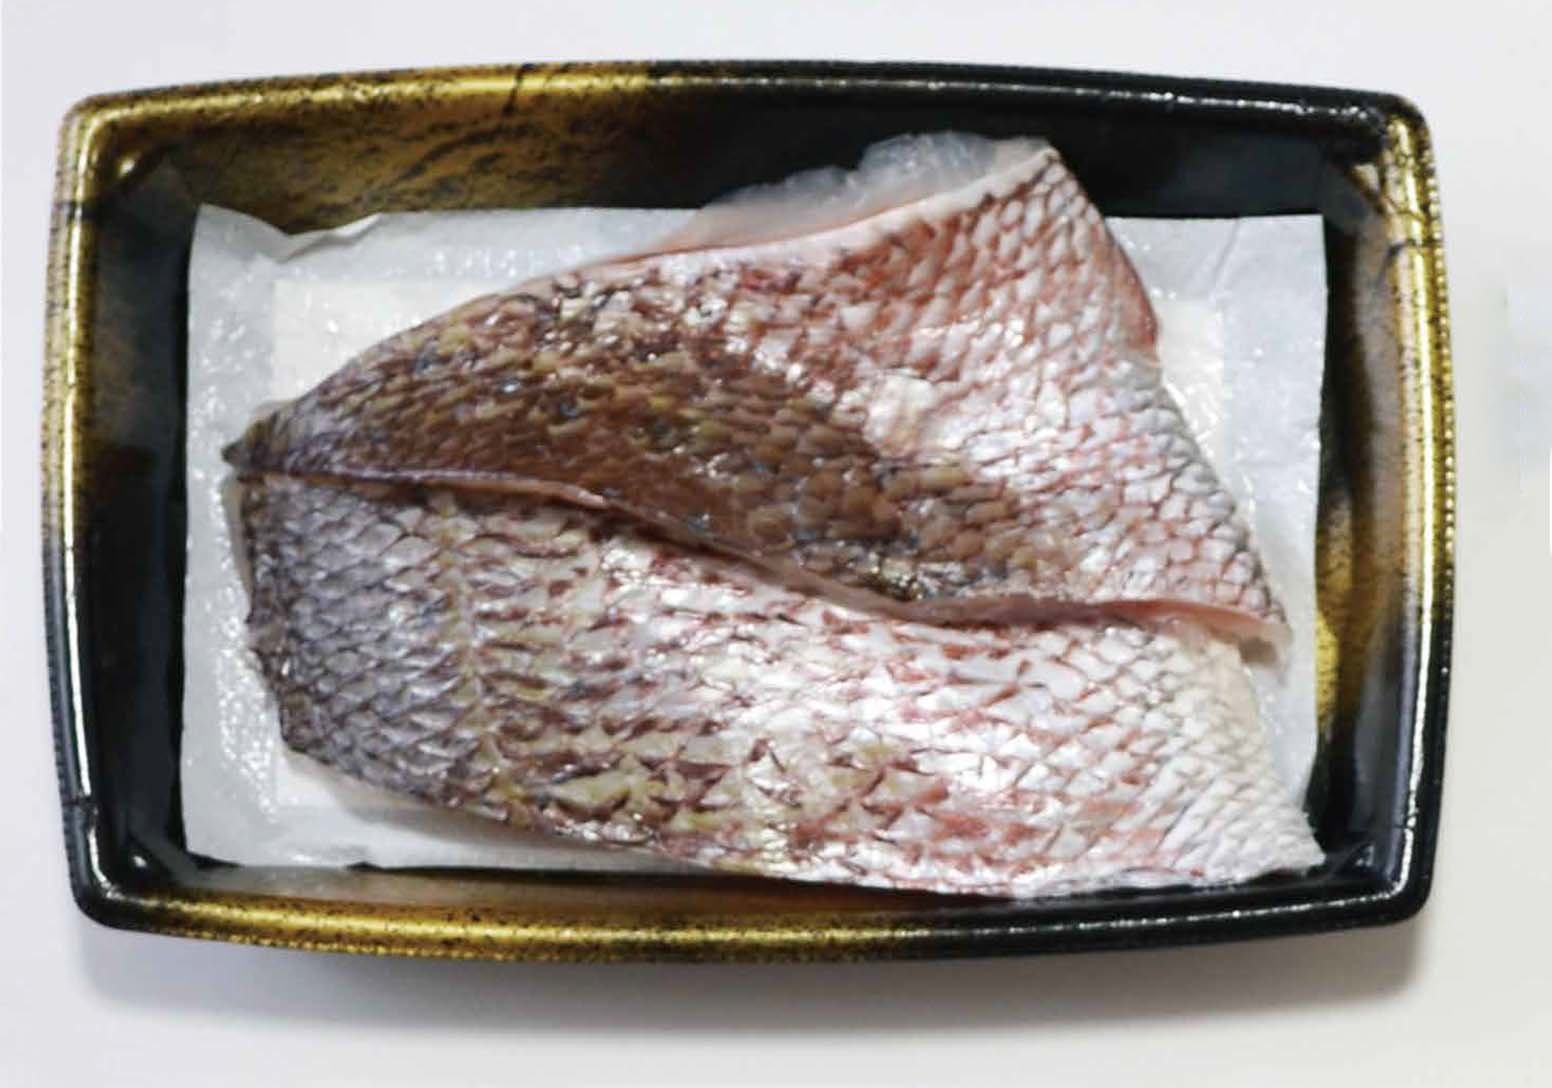 leak-free absorbent food pad design to absorb excess moisture for cut fish fillets